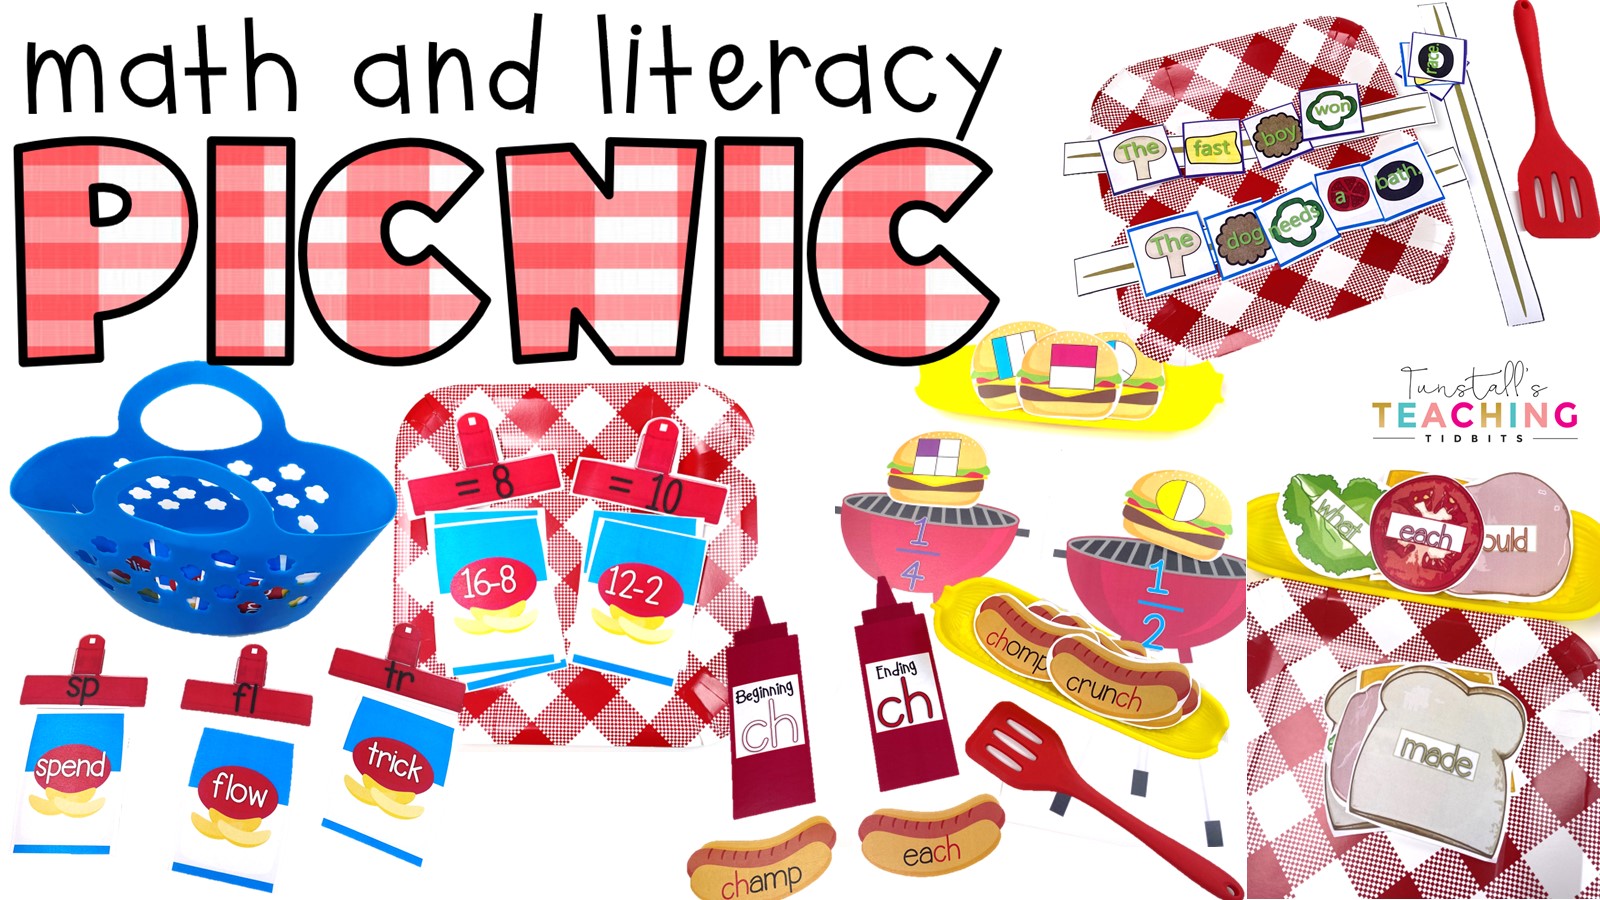 Let’s Have a Math and Literacy Picnic